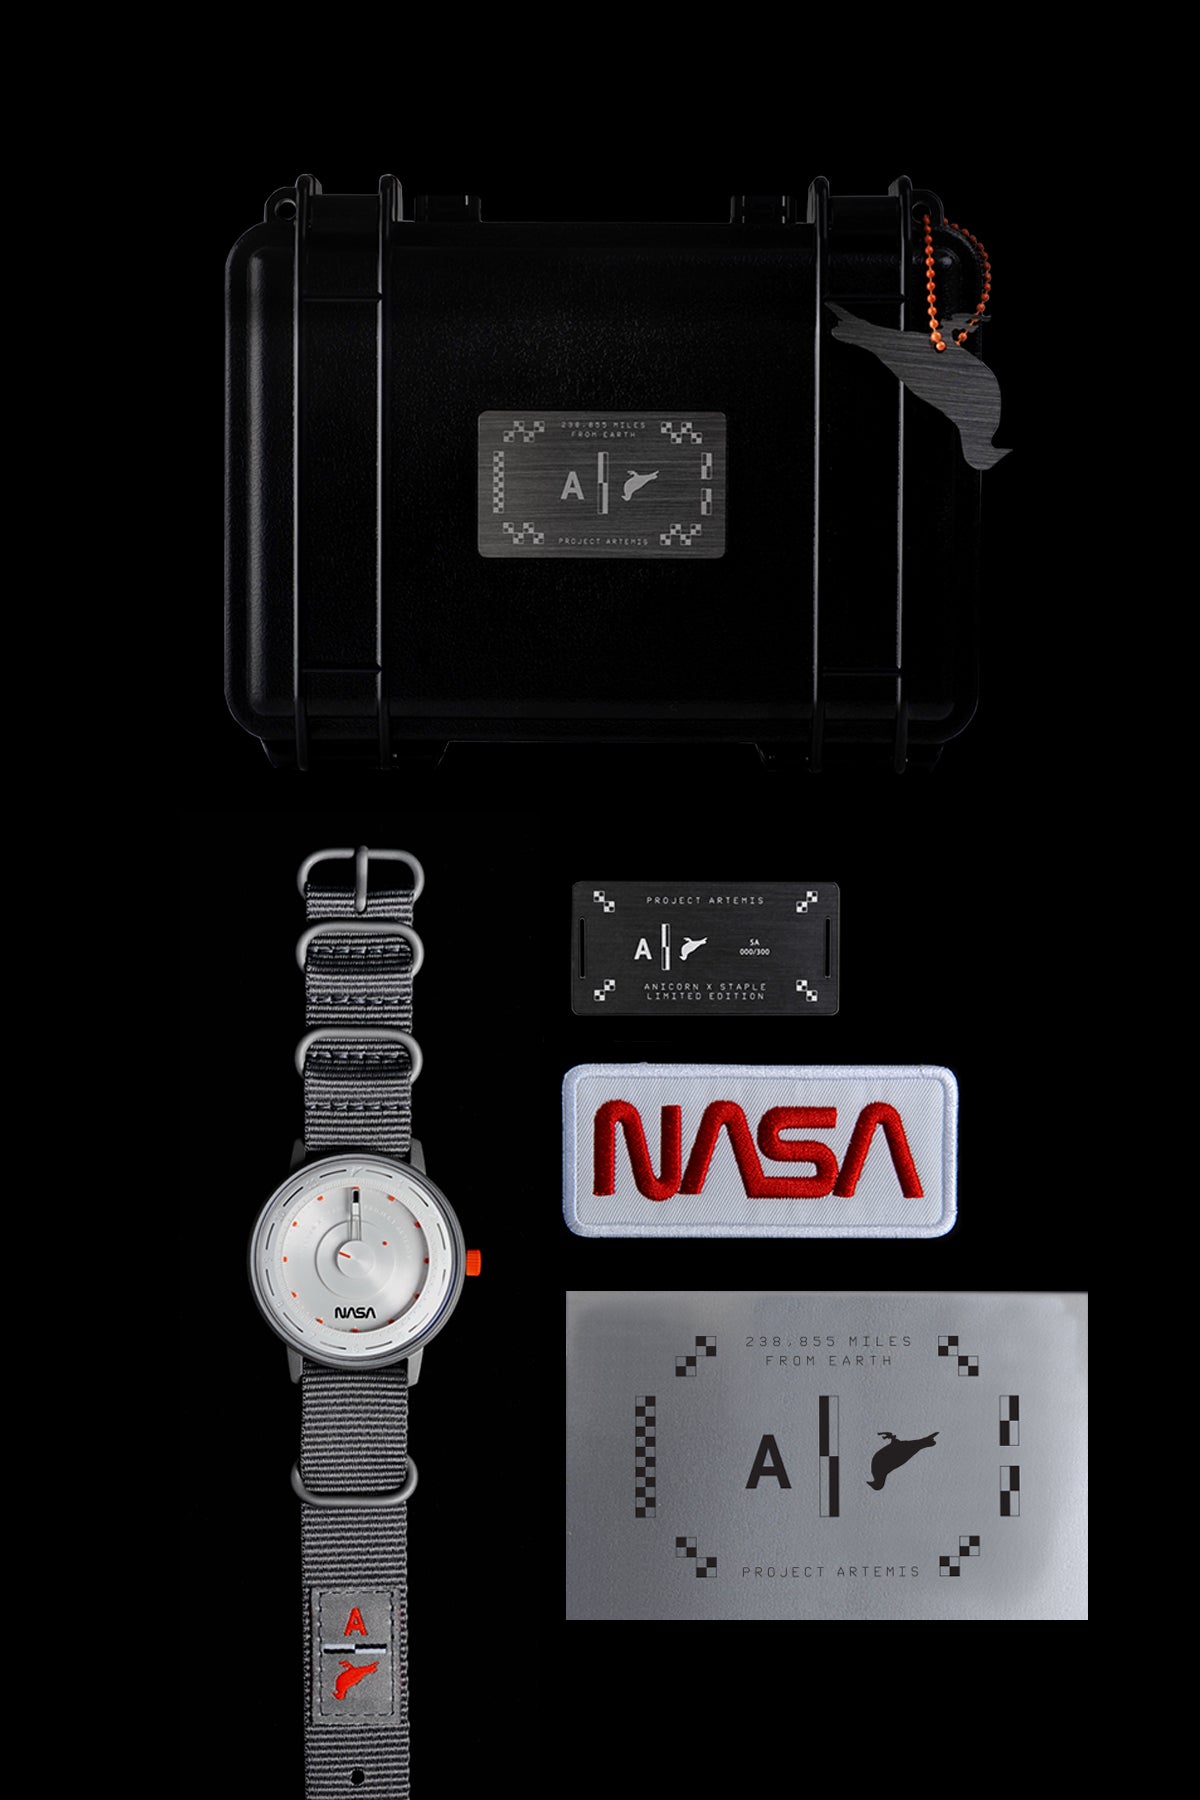 A box-set of "Artemis Time" with a metal number card and a NASA badge next to it